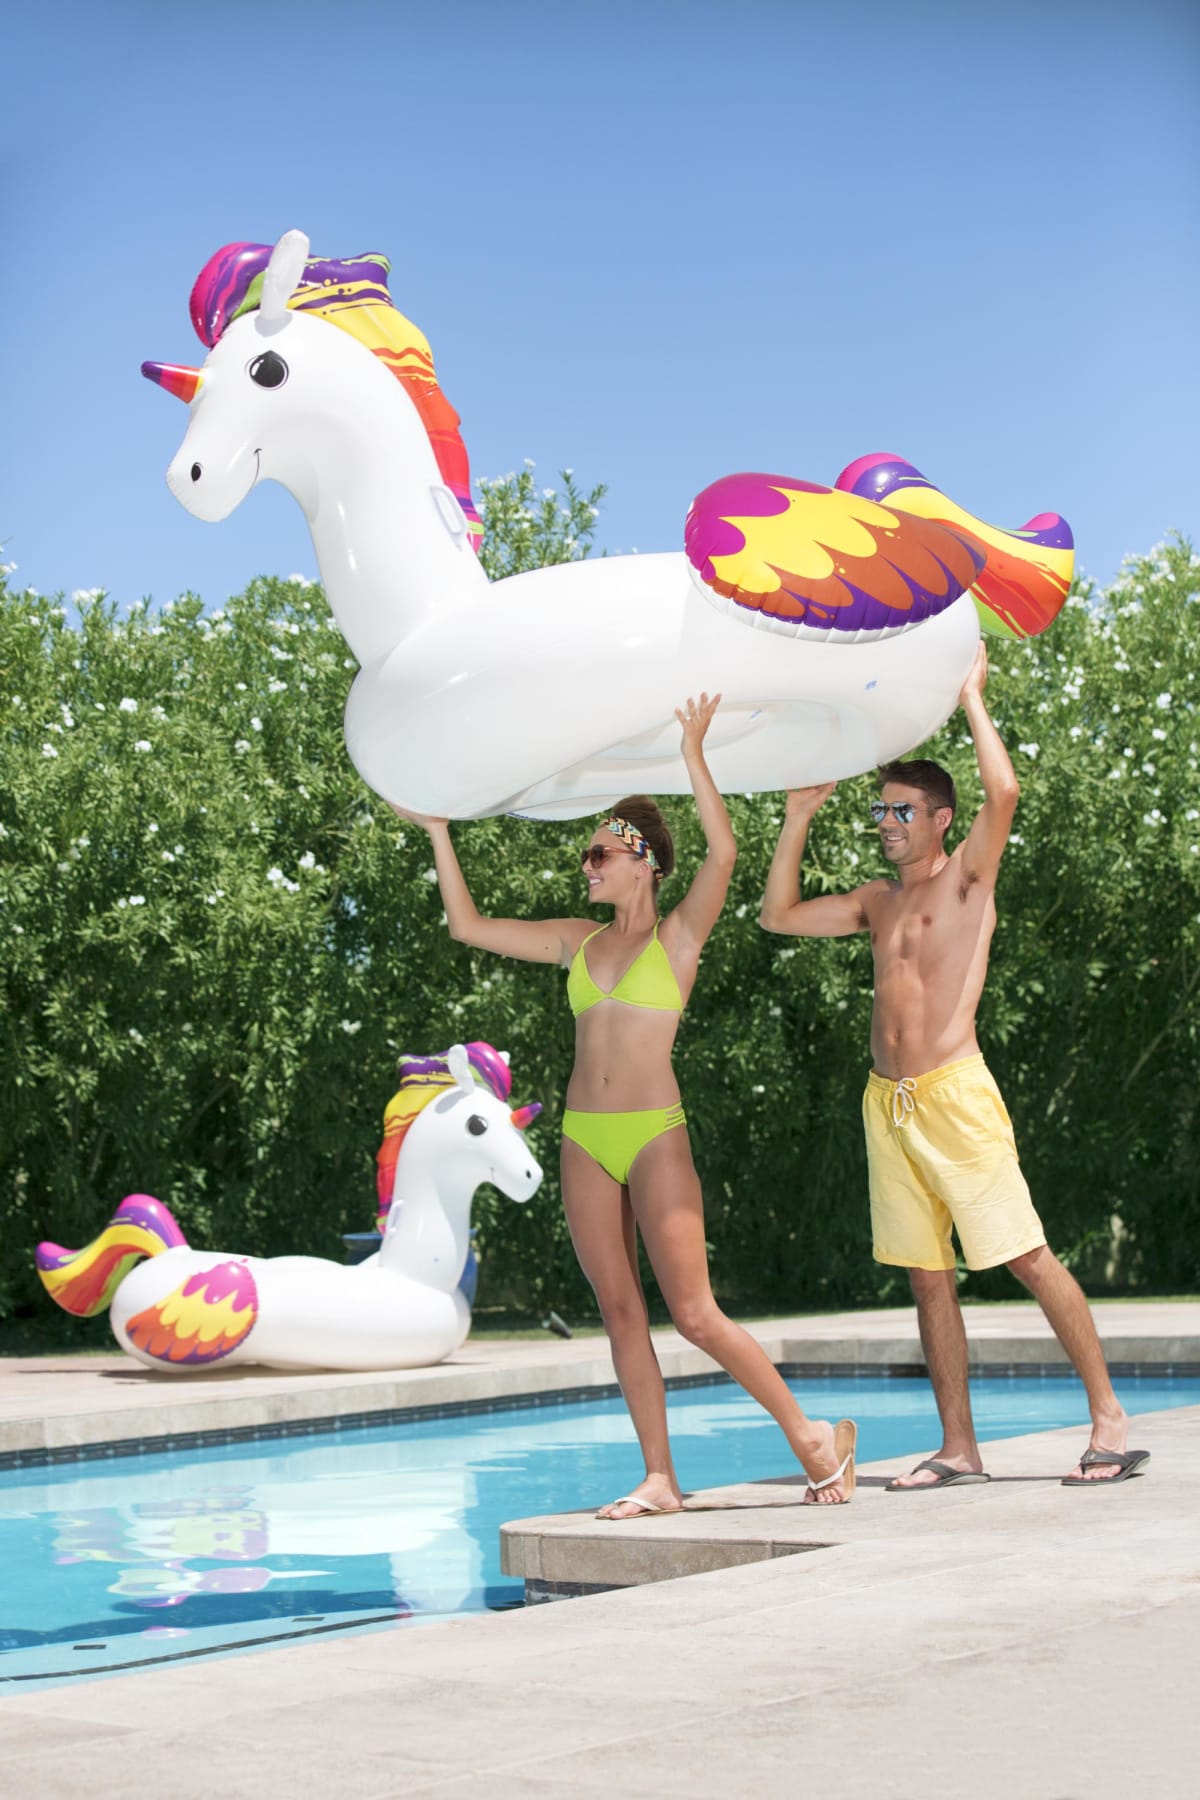 RIDEABLE LARGE UNICORN 220X195 CM, WITH HANDLES AND CUP HOLDER